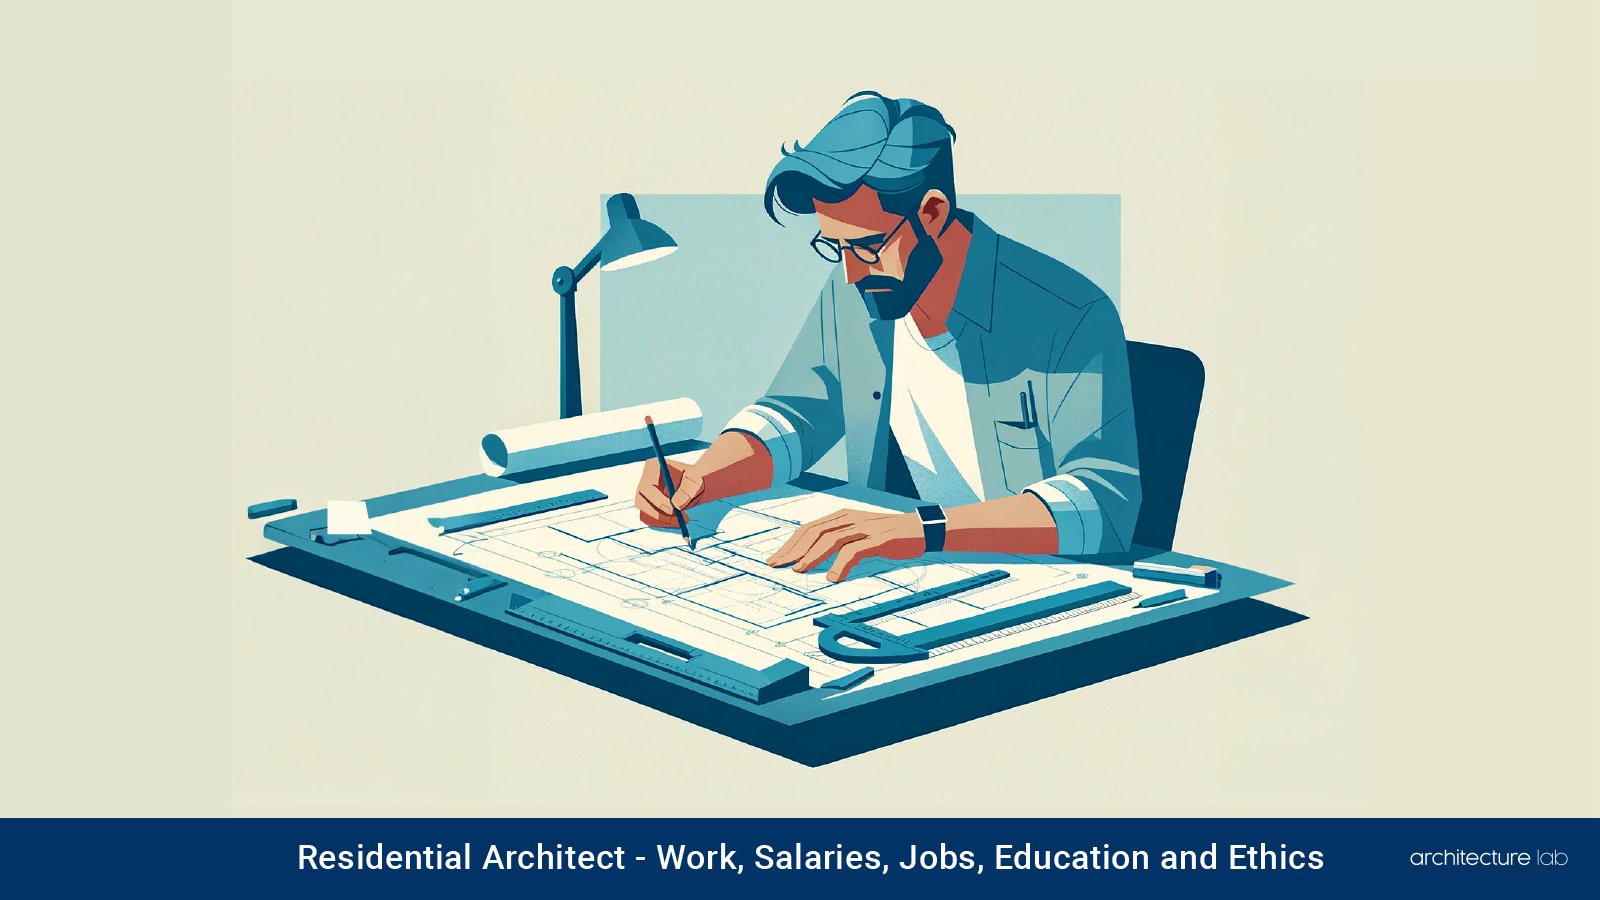 Residential architect: work, salaries, jobs, education, and ethics